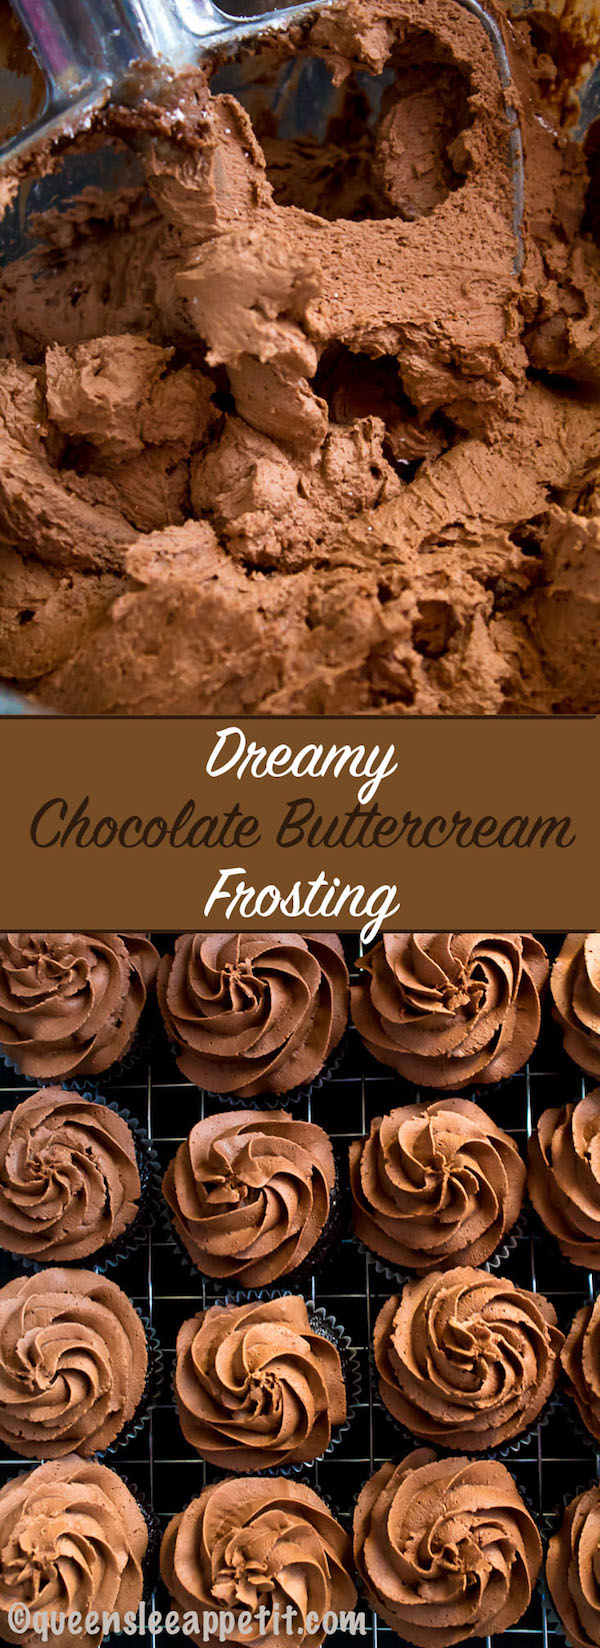 A light, fluffy, silky and dreamy Chocolate Buttercream Frosting. Perfect for frosting cakes, cupcakes, and more!